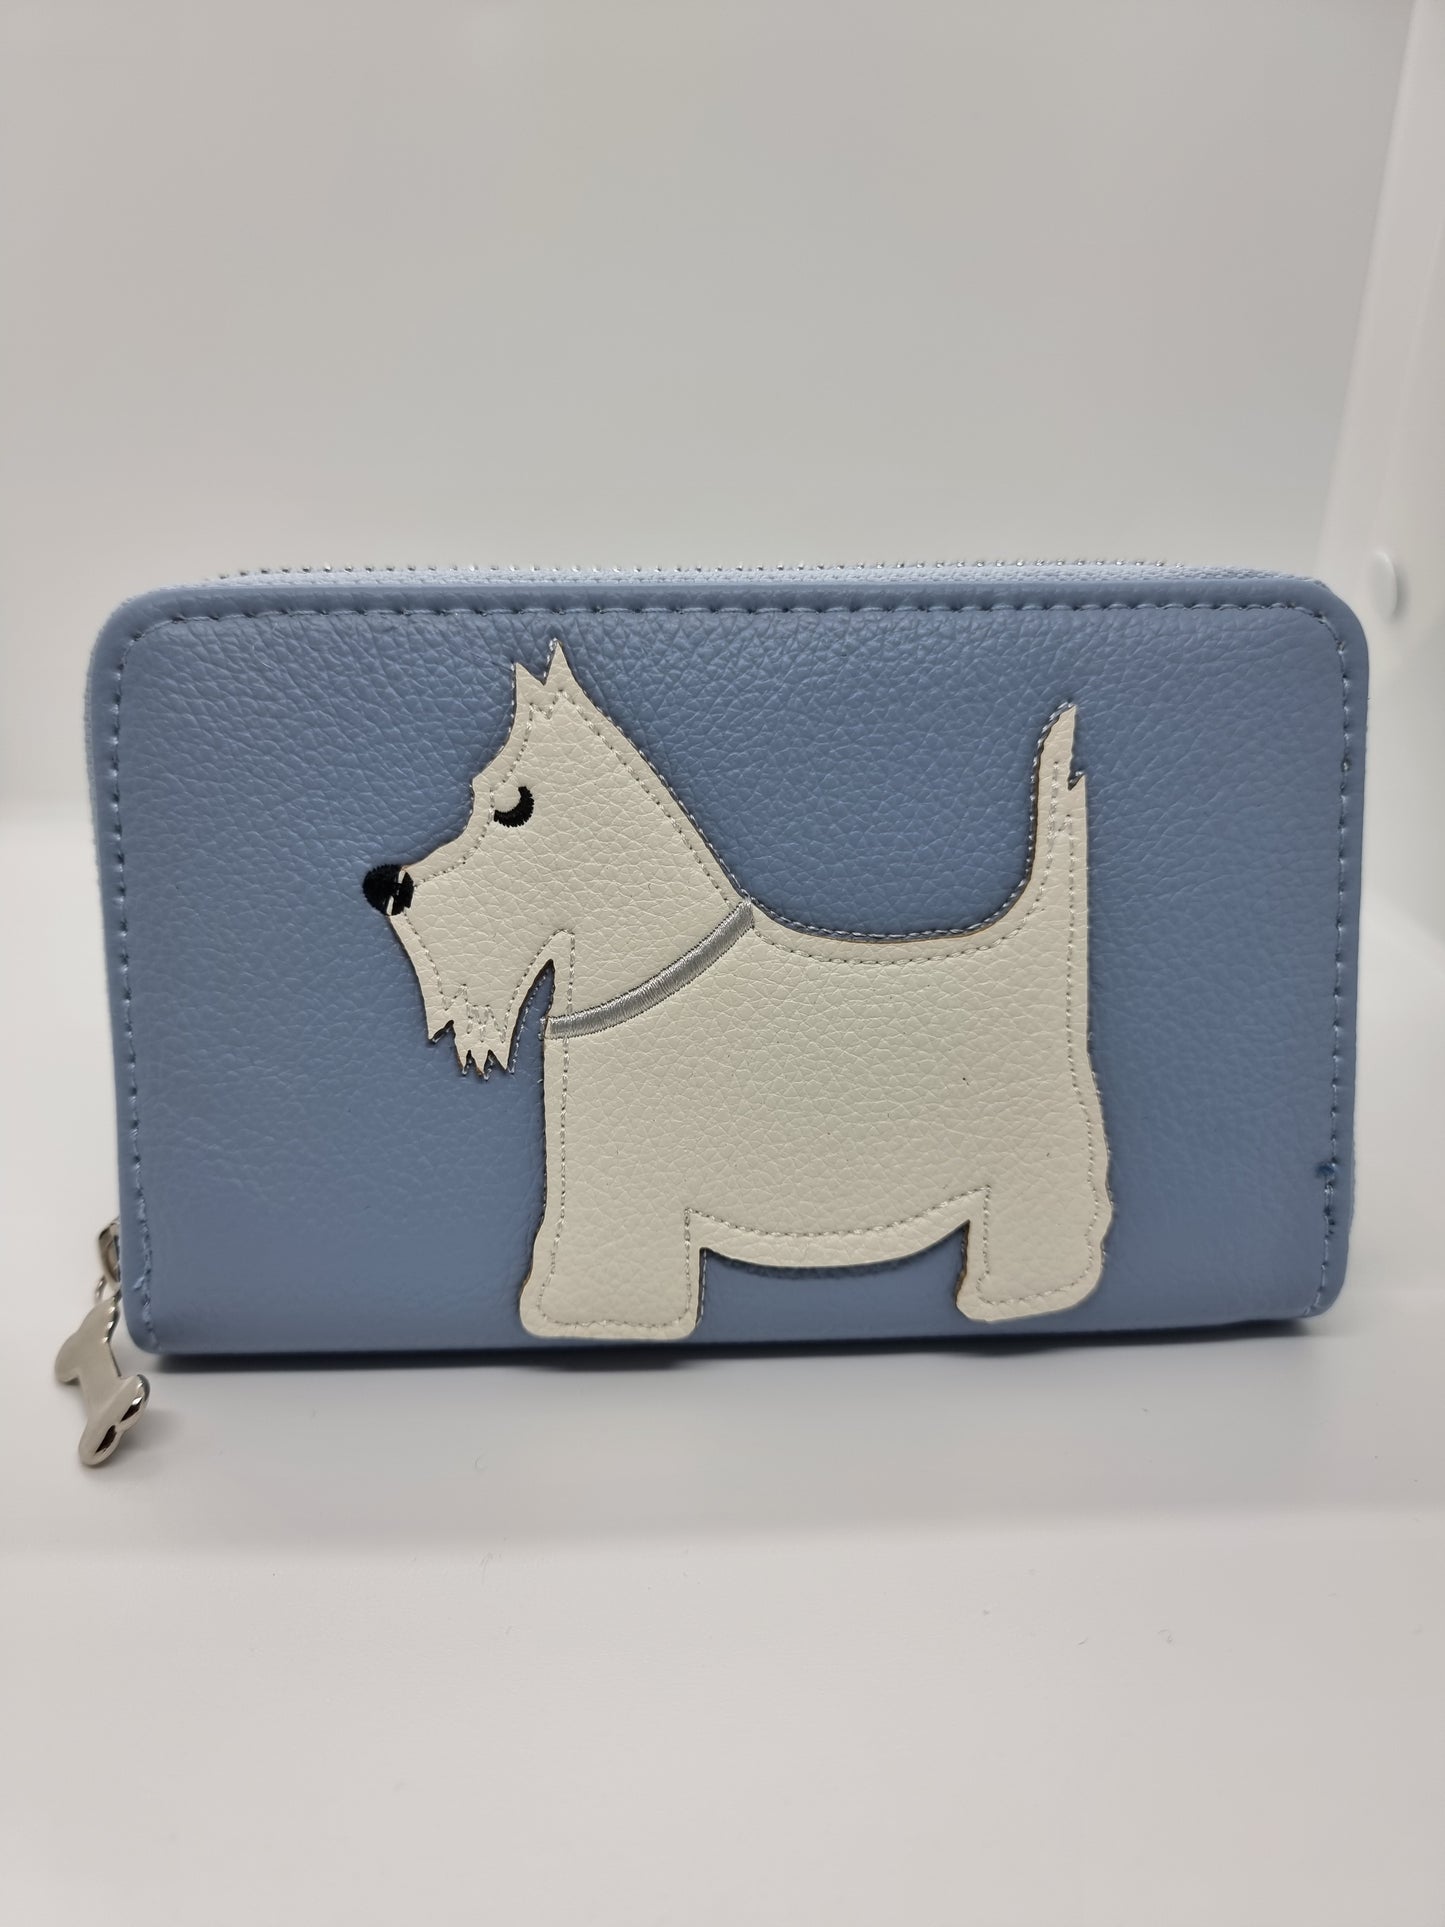 Scotty dog purse with FREE DELIVERY